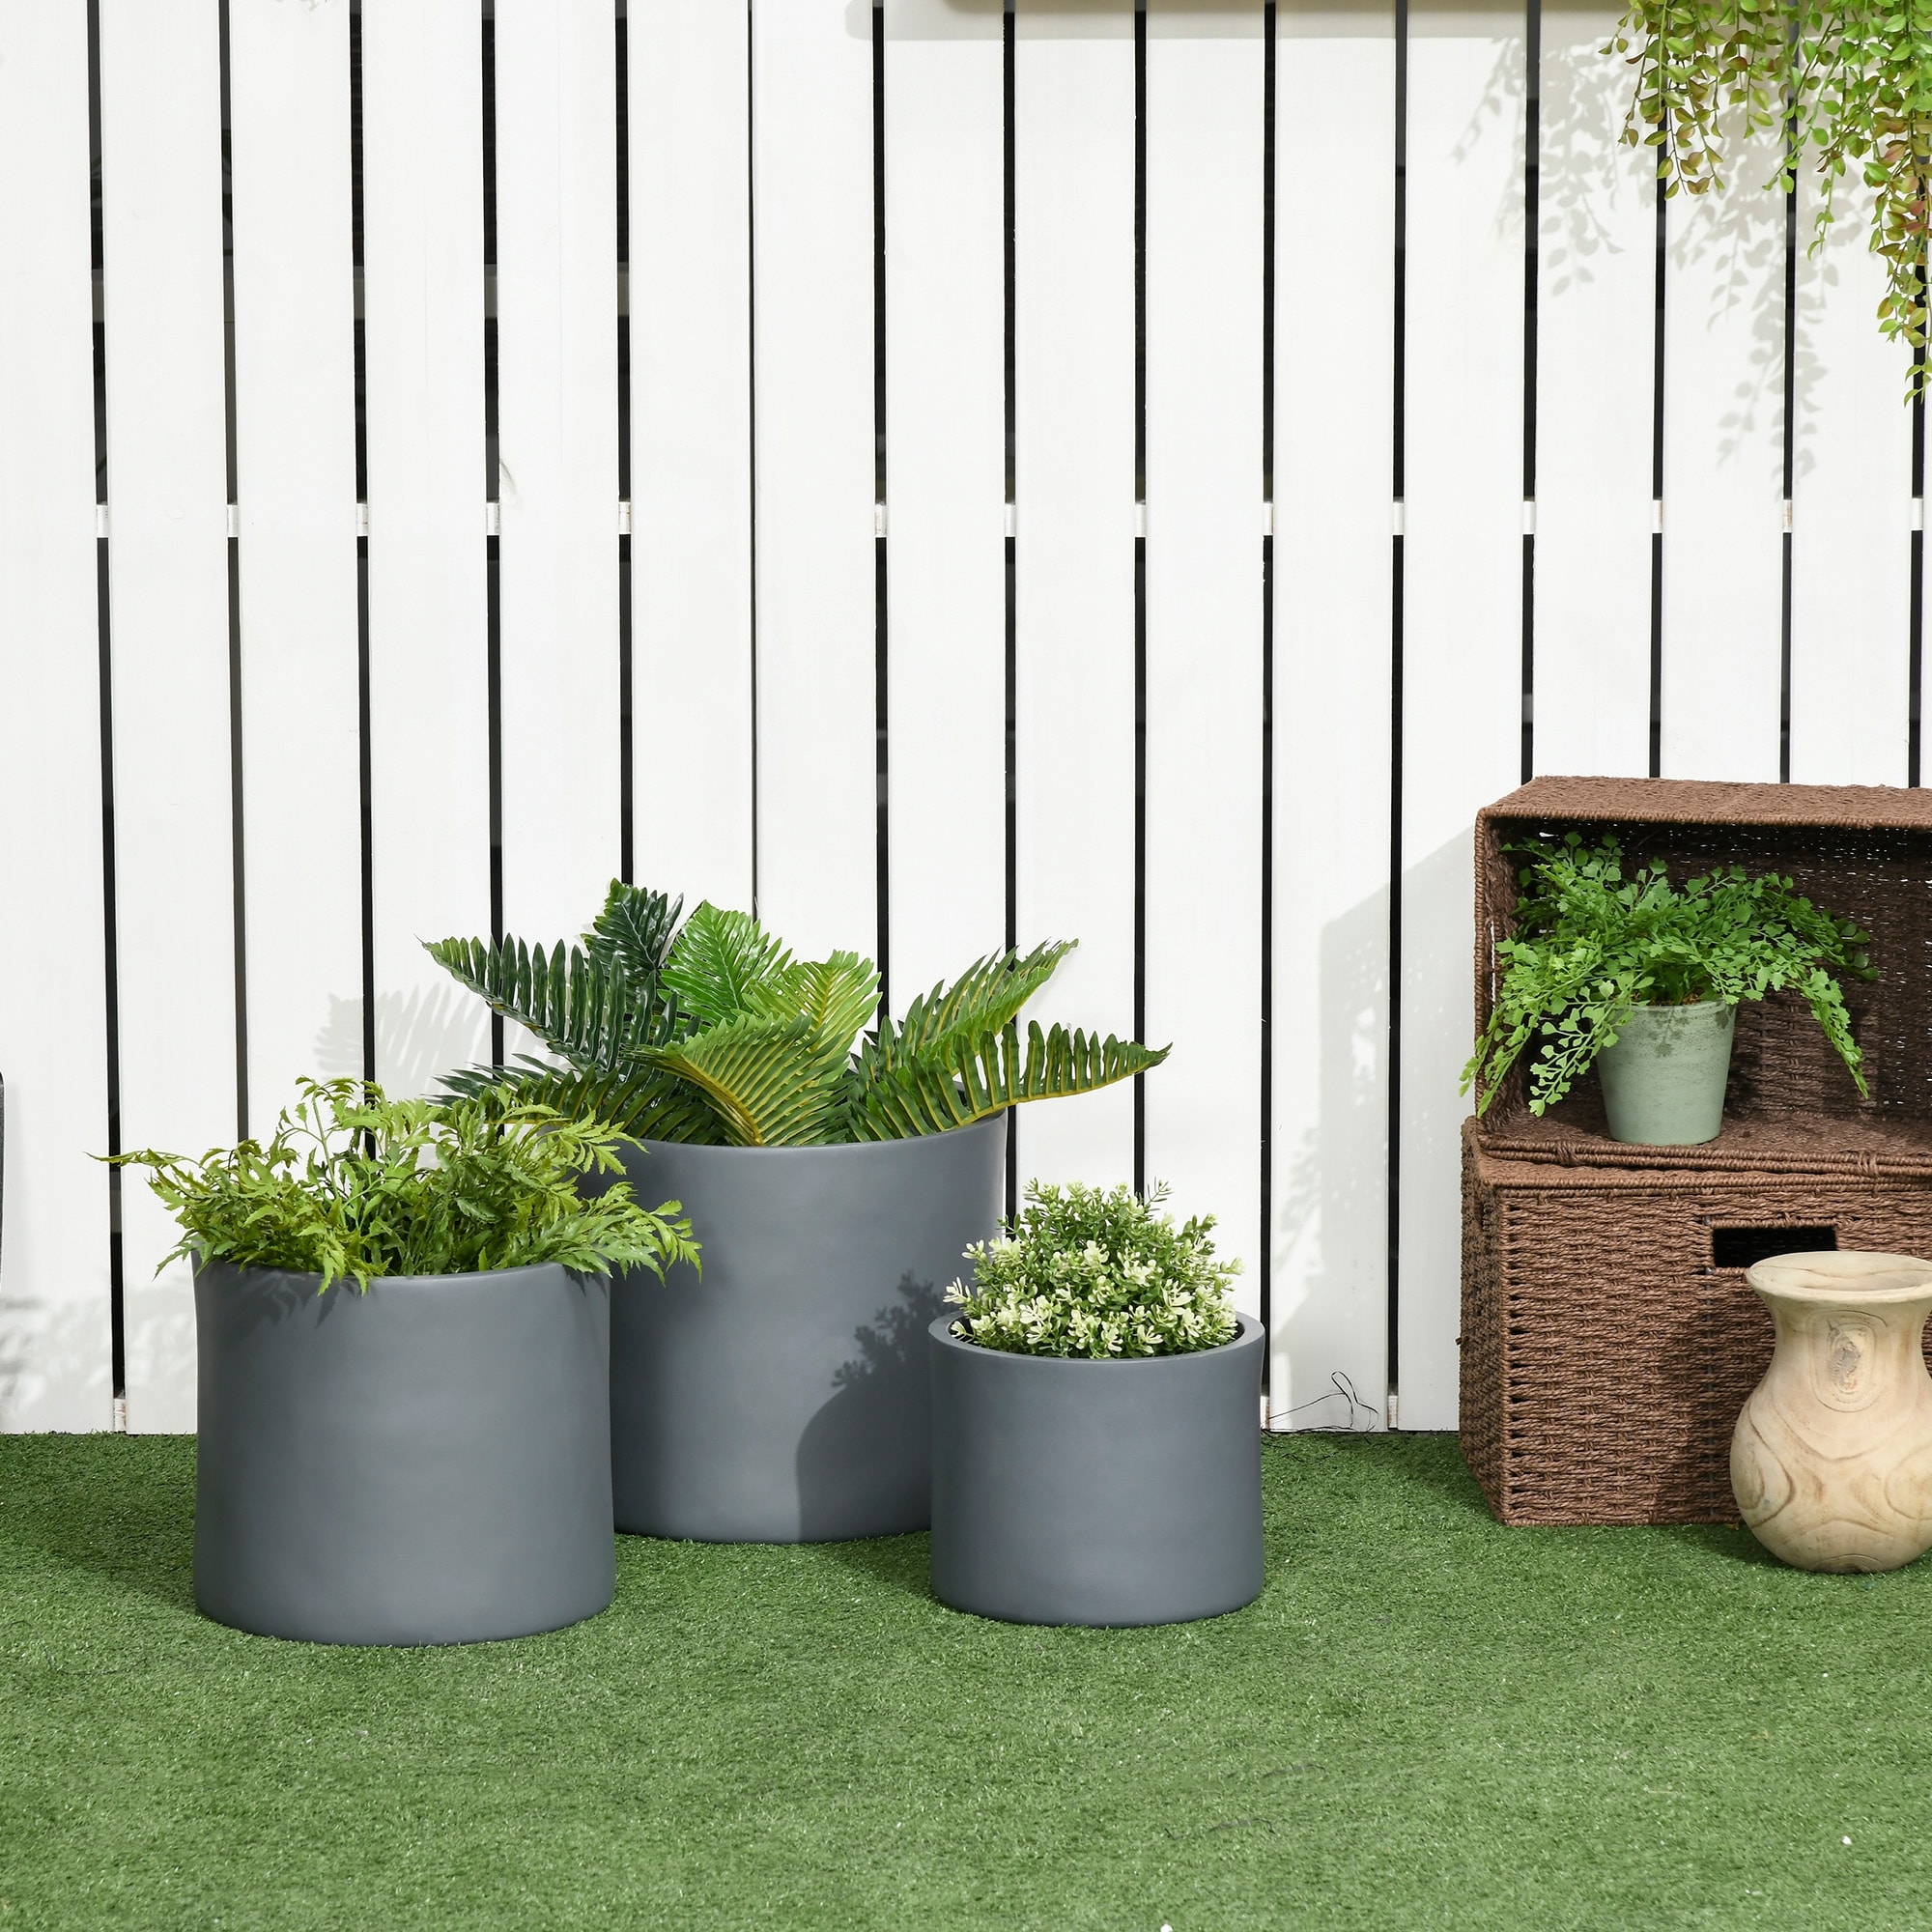 https://ak1.ostkcdn.com/images/products/is/images/direct/7e578477b4eb975c4d403fd0b65b5bce8c651c5e/Outsunny-3-Pack-Outdoor-Planter-Set%2C-MgO-Flower-Pots-with-Drainage-Holes%2C-Outdoor-Ready-%26-Stackable-for-Indoor.jpg